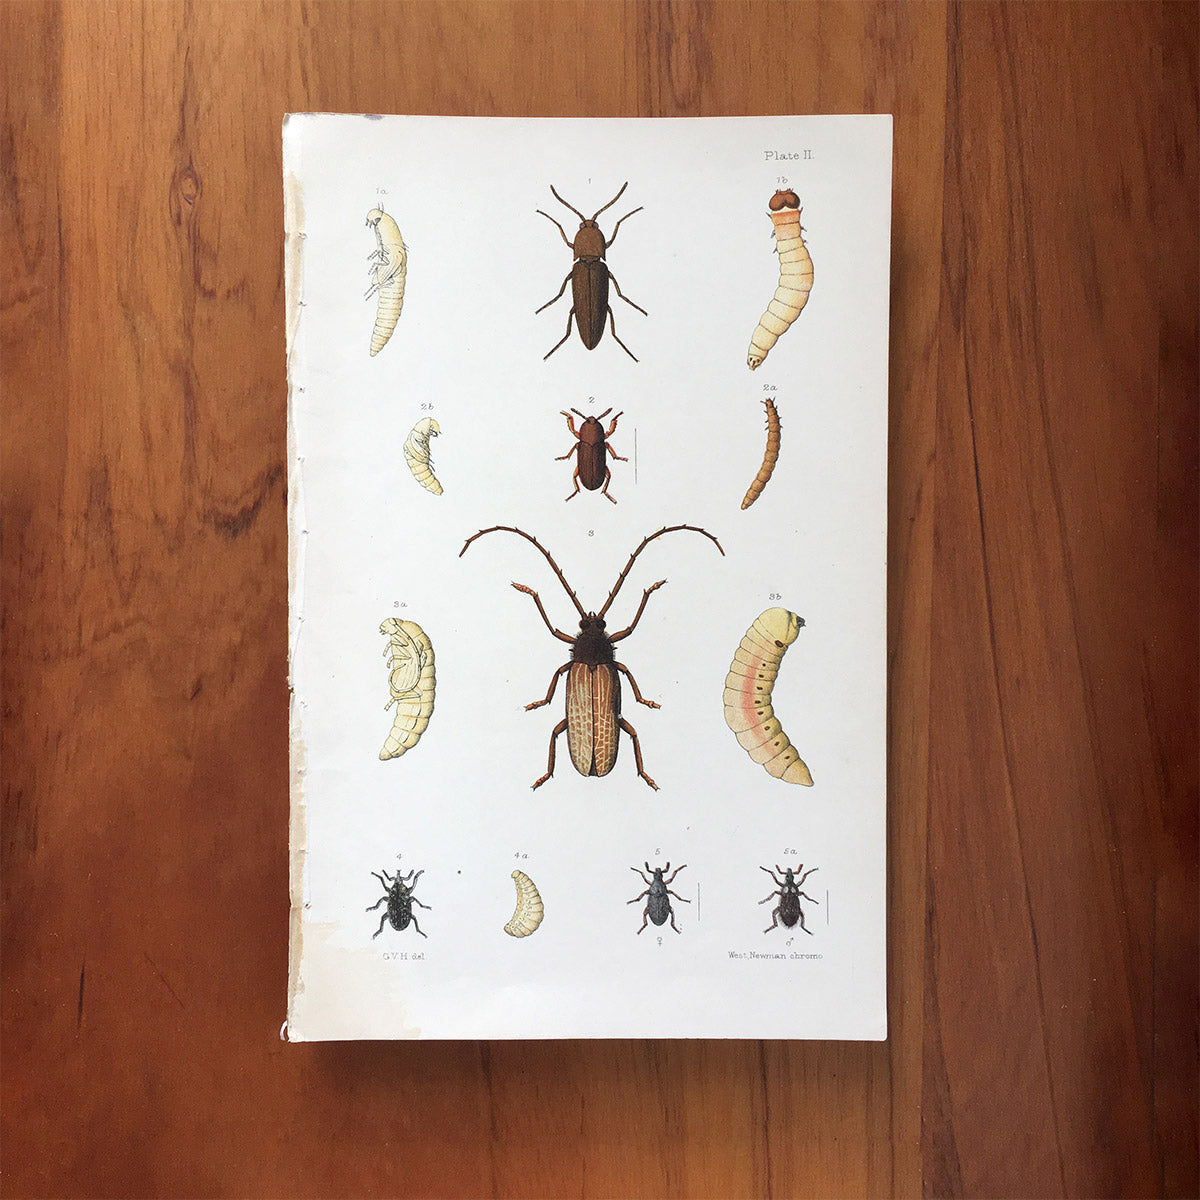 New Zealand insects. Plate II. Coleoptera